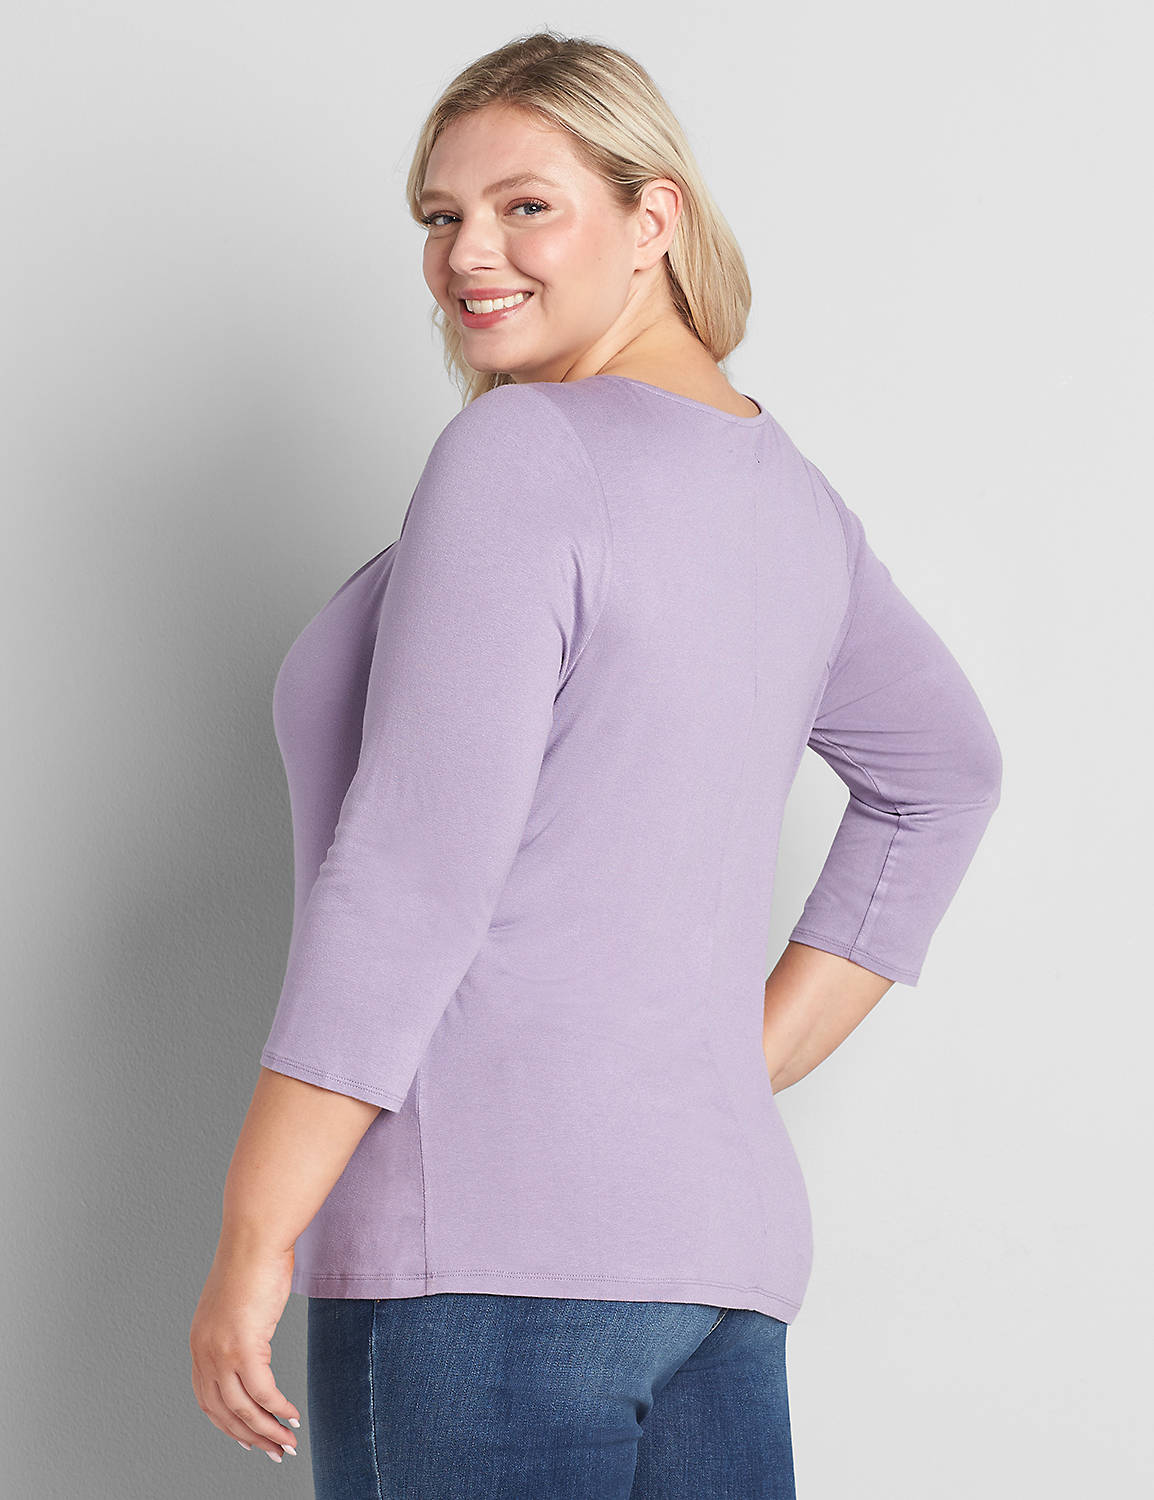 Pleat-Neck Illusion Top Product Image 2